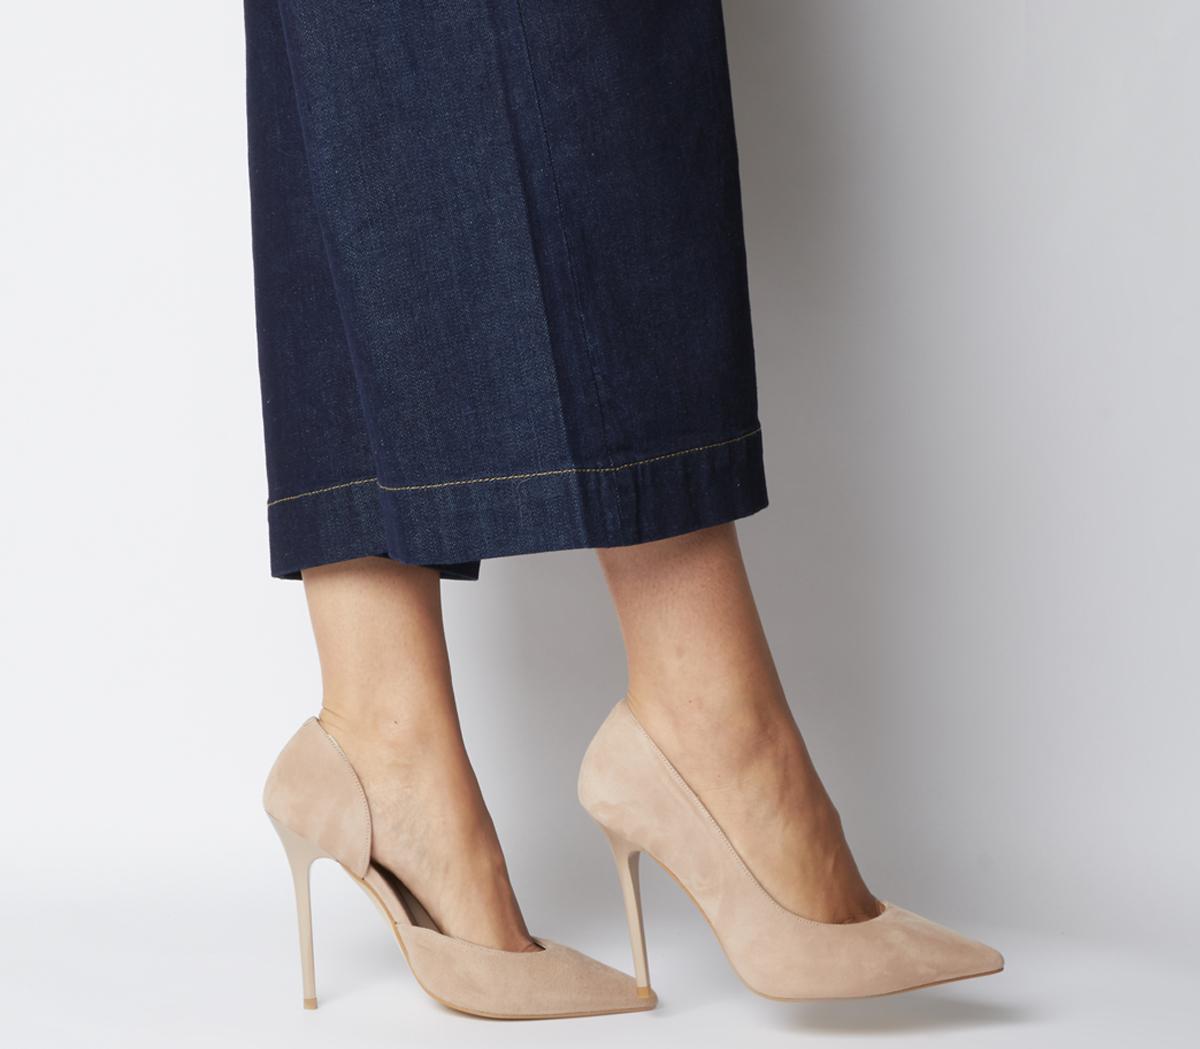 OFFICEHappiness Court ShoesBlush Suede